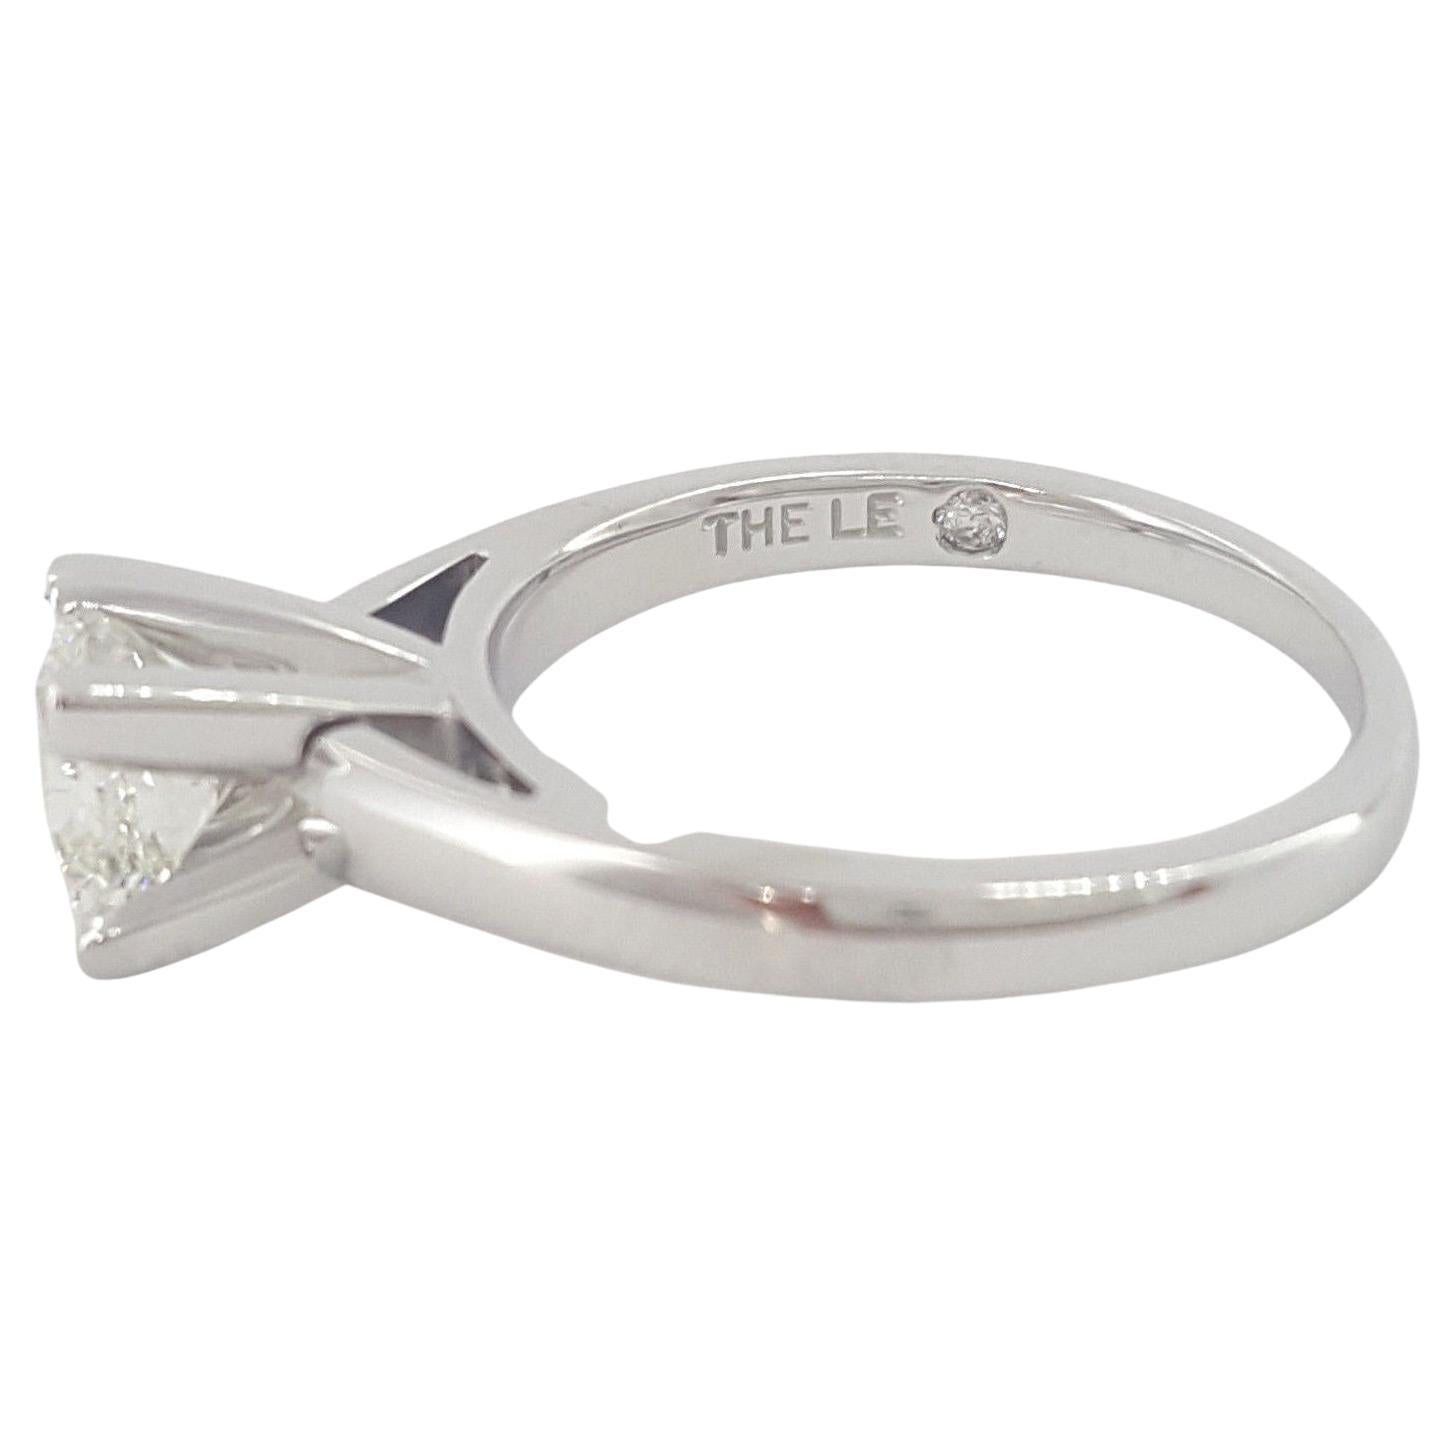 Leo Princess Brilliant Cut Diamond Solitaire Engagement Ring.



 The Shank is 14K White Gold,  the head is 950 Platinum, weighs 4.9 grams, size 6.5, the center is a Leo Princess Brilliant Cut diamond weighing 1 ct, I in color, and VS2 in clarity.